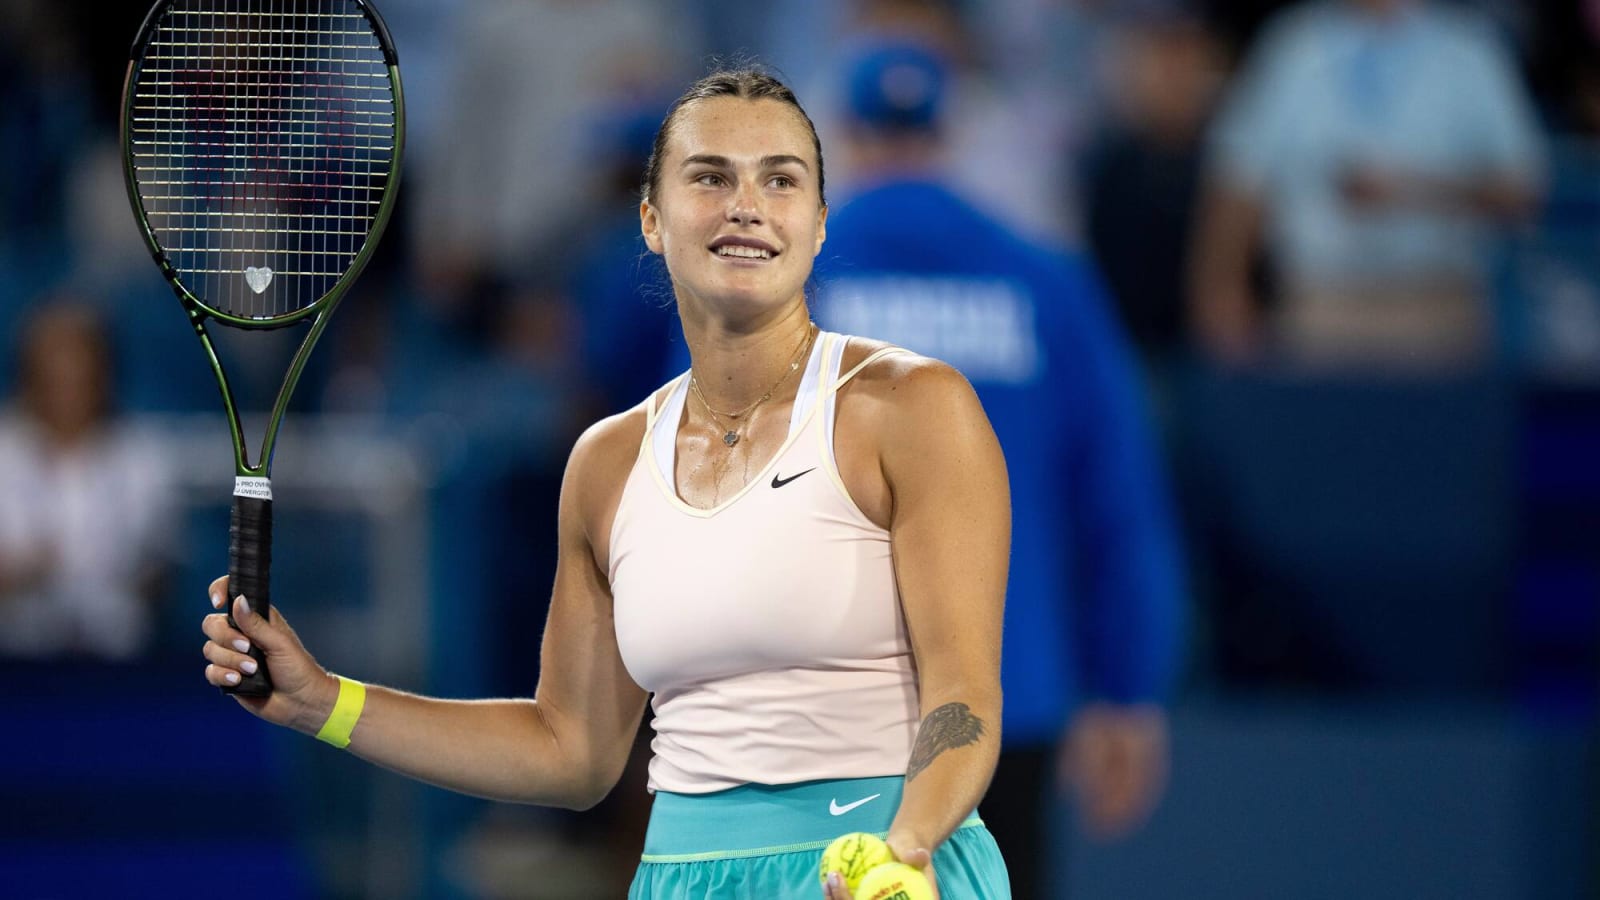 'I Was Super Unprofessional': Sabalenka On Previous Meeting With ...